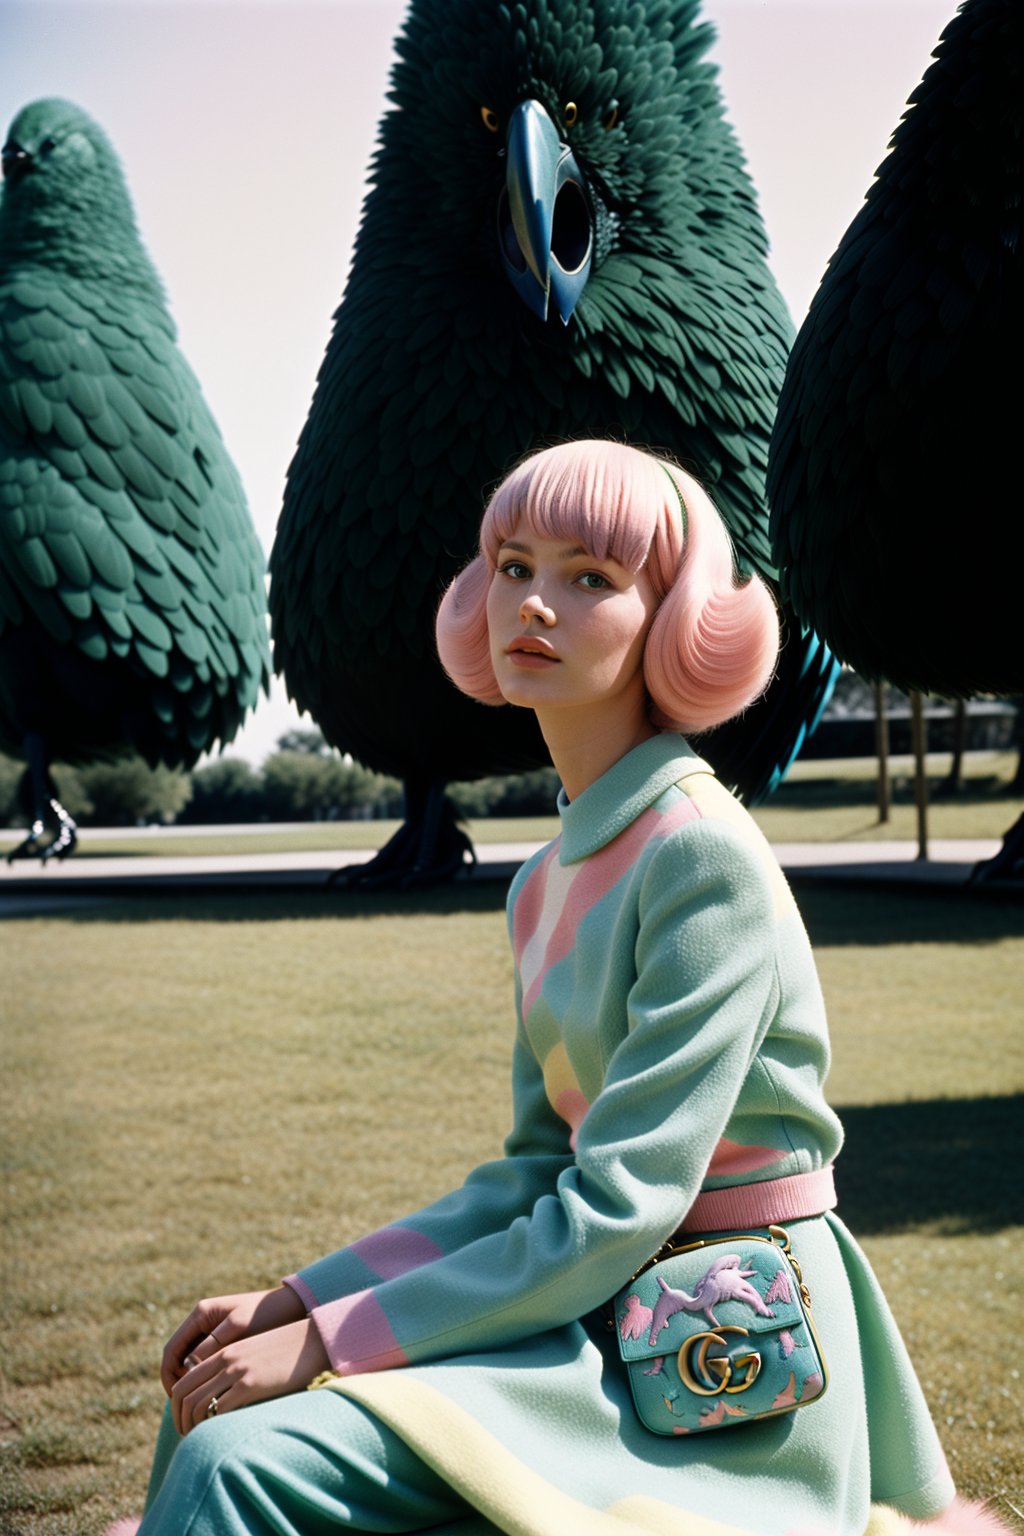 A photo of a woman Gucci model sitting in a beautiful park in 1970, there is an enormous weird bird beside her, she is in a pastel Miu Miu outfit from 1965 with a bold pattern, The bird creature is pastel and colorful, photo by Wes Anderson in 1965 from a sci-fi campy film, her hair is 1970s style, cinematic photo,